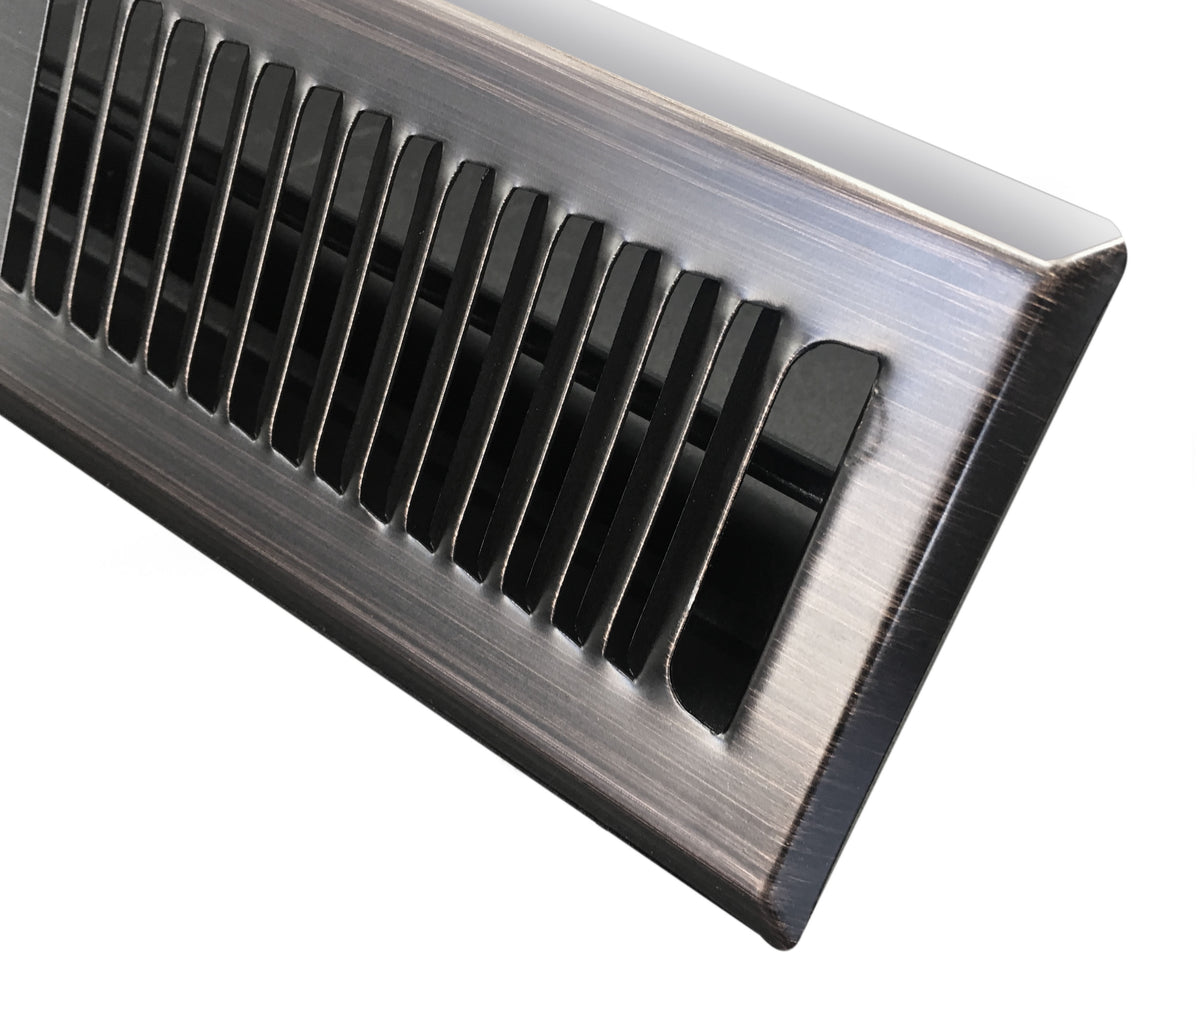 4&quot; X 12&quot; Modern Floor Register Grille With Dampers - Contempo Slotted Grate - HVAC Vent Duct Cover - Matte Black